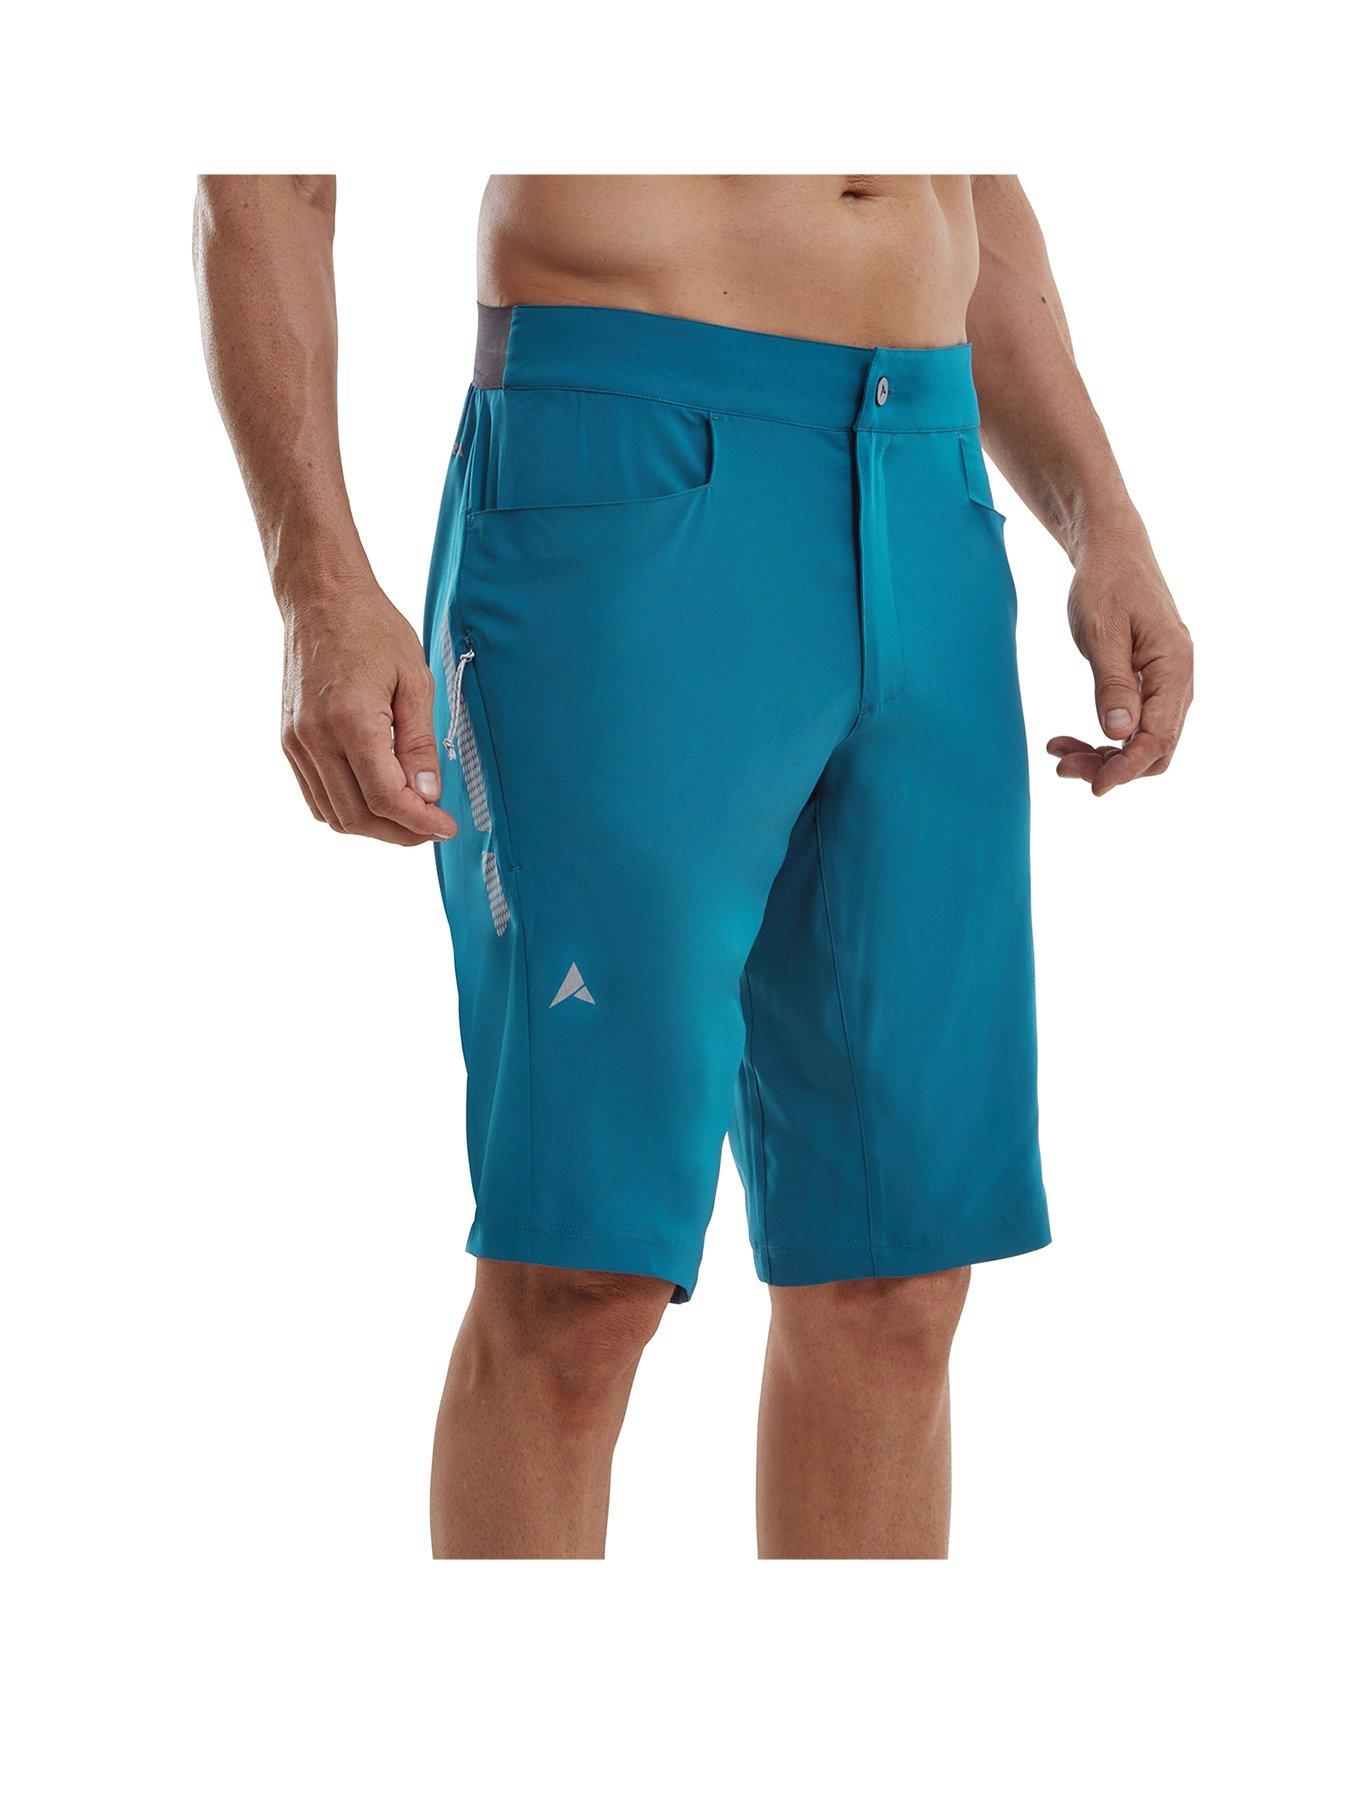 Details about   Mens Cycling Short Padded Under Bike Riding Gym Running Cycle Sport Cyclical 